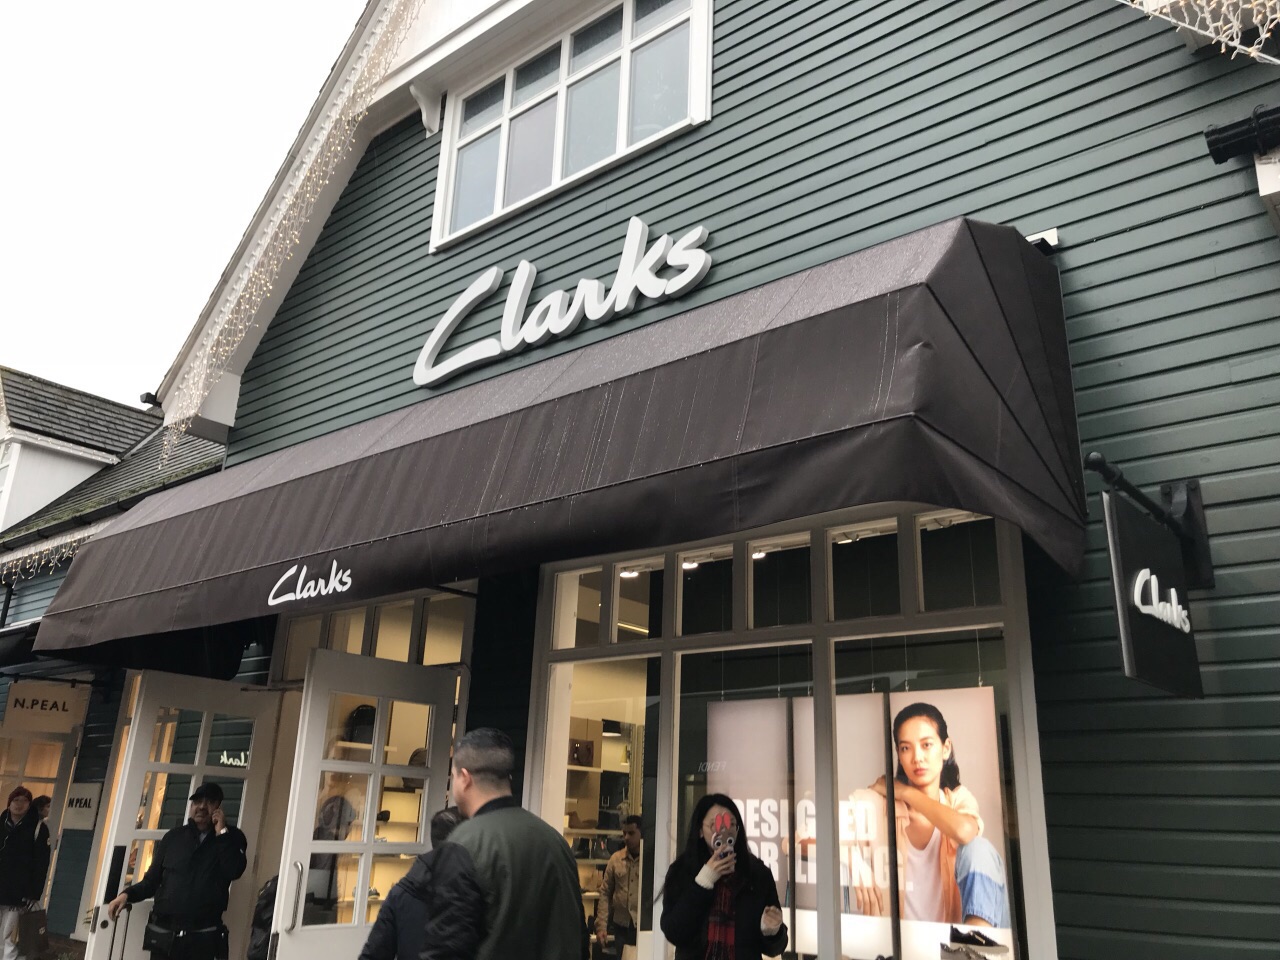 Shopping itineraries in Clarks in 2023-06-18T17:00:00-07:00 (updated in  2023-06-18T17:00:00-07:00) - Trip.com